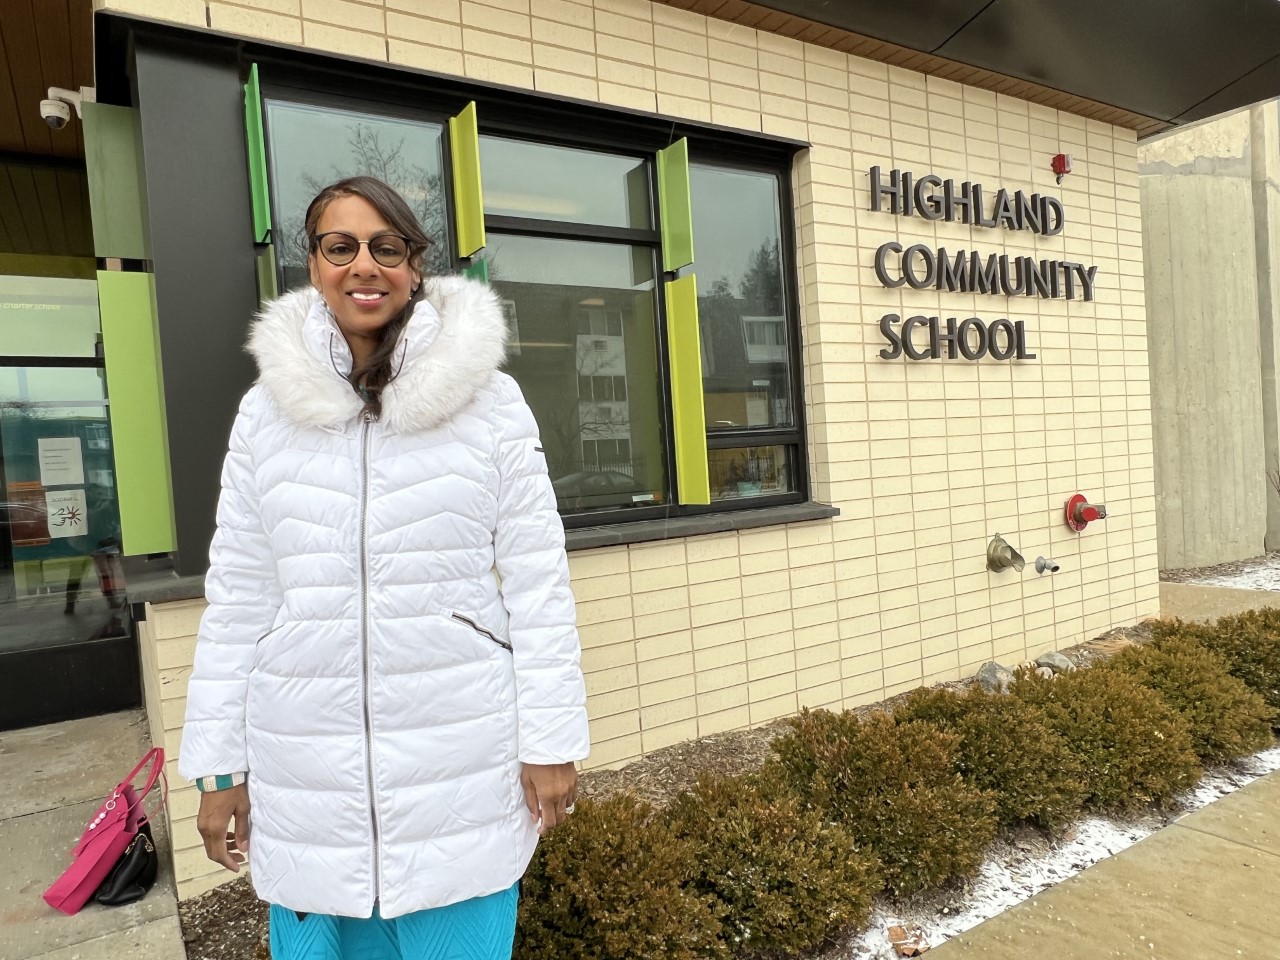 Patricia Cifax Adams poses in front of Highland Community School